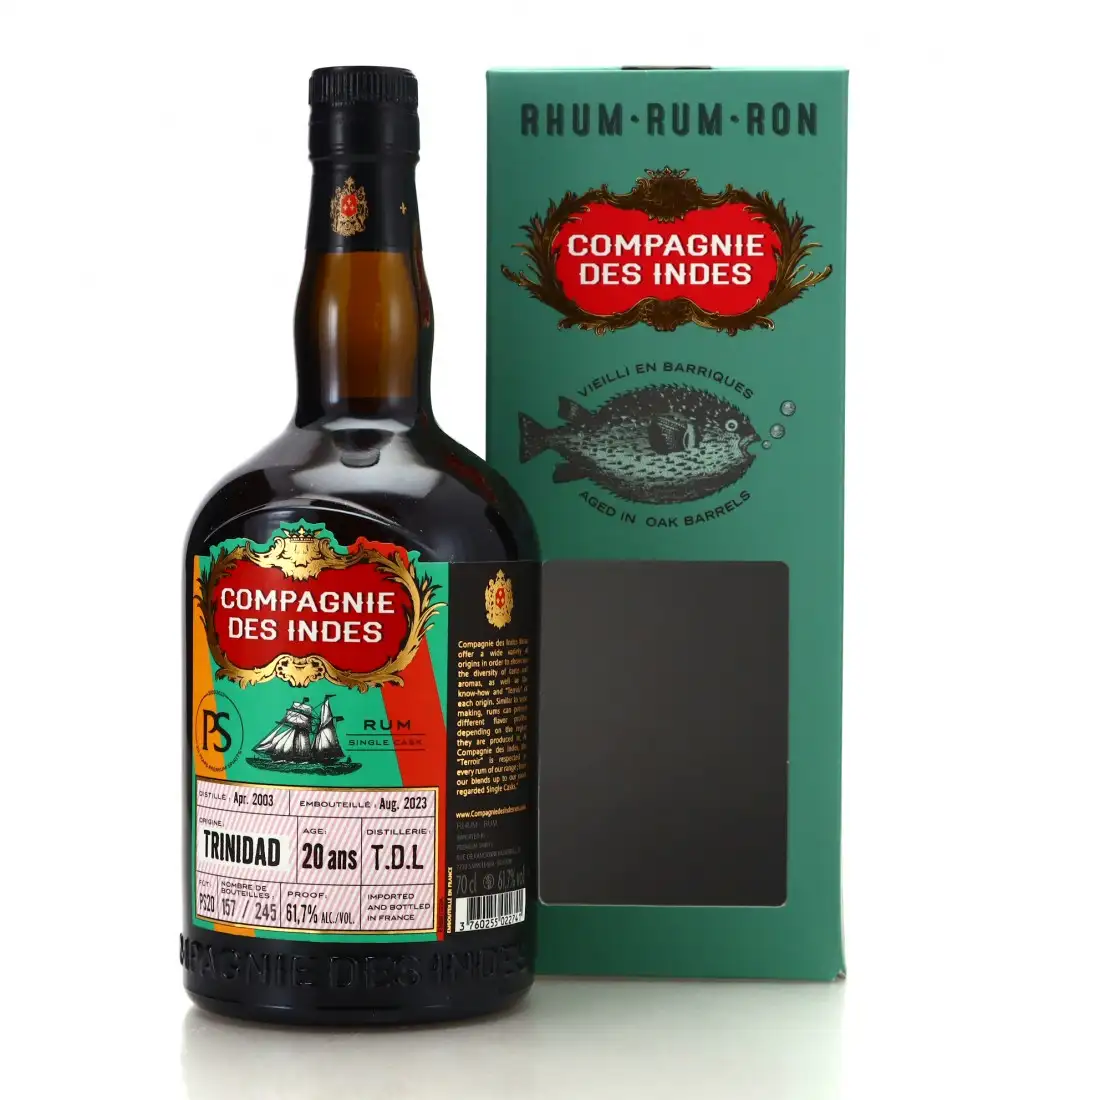 Image of the front of the bottle of the rum Trinidad (Premium Spirits)